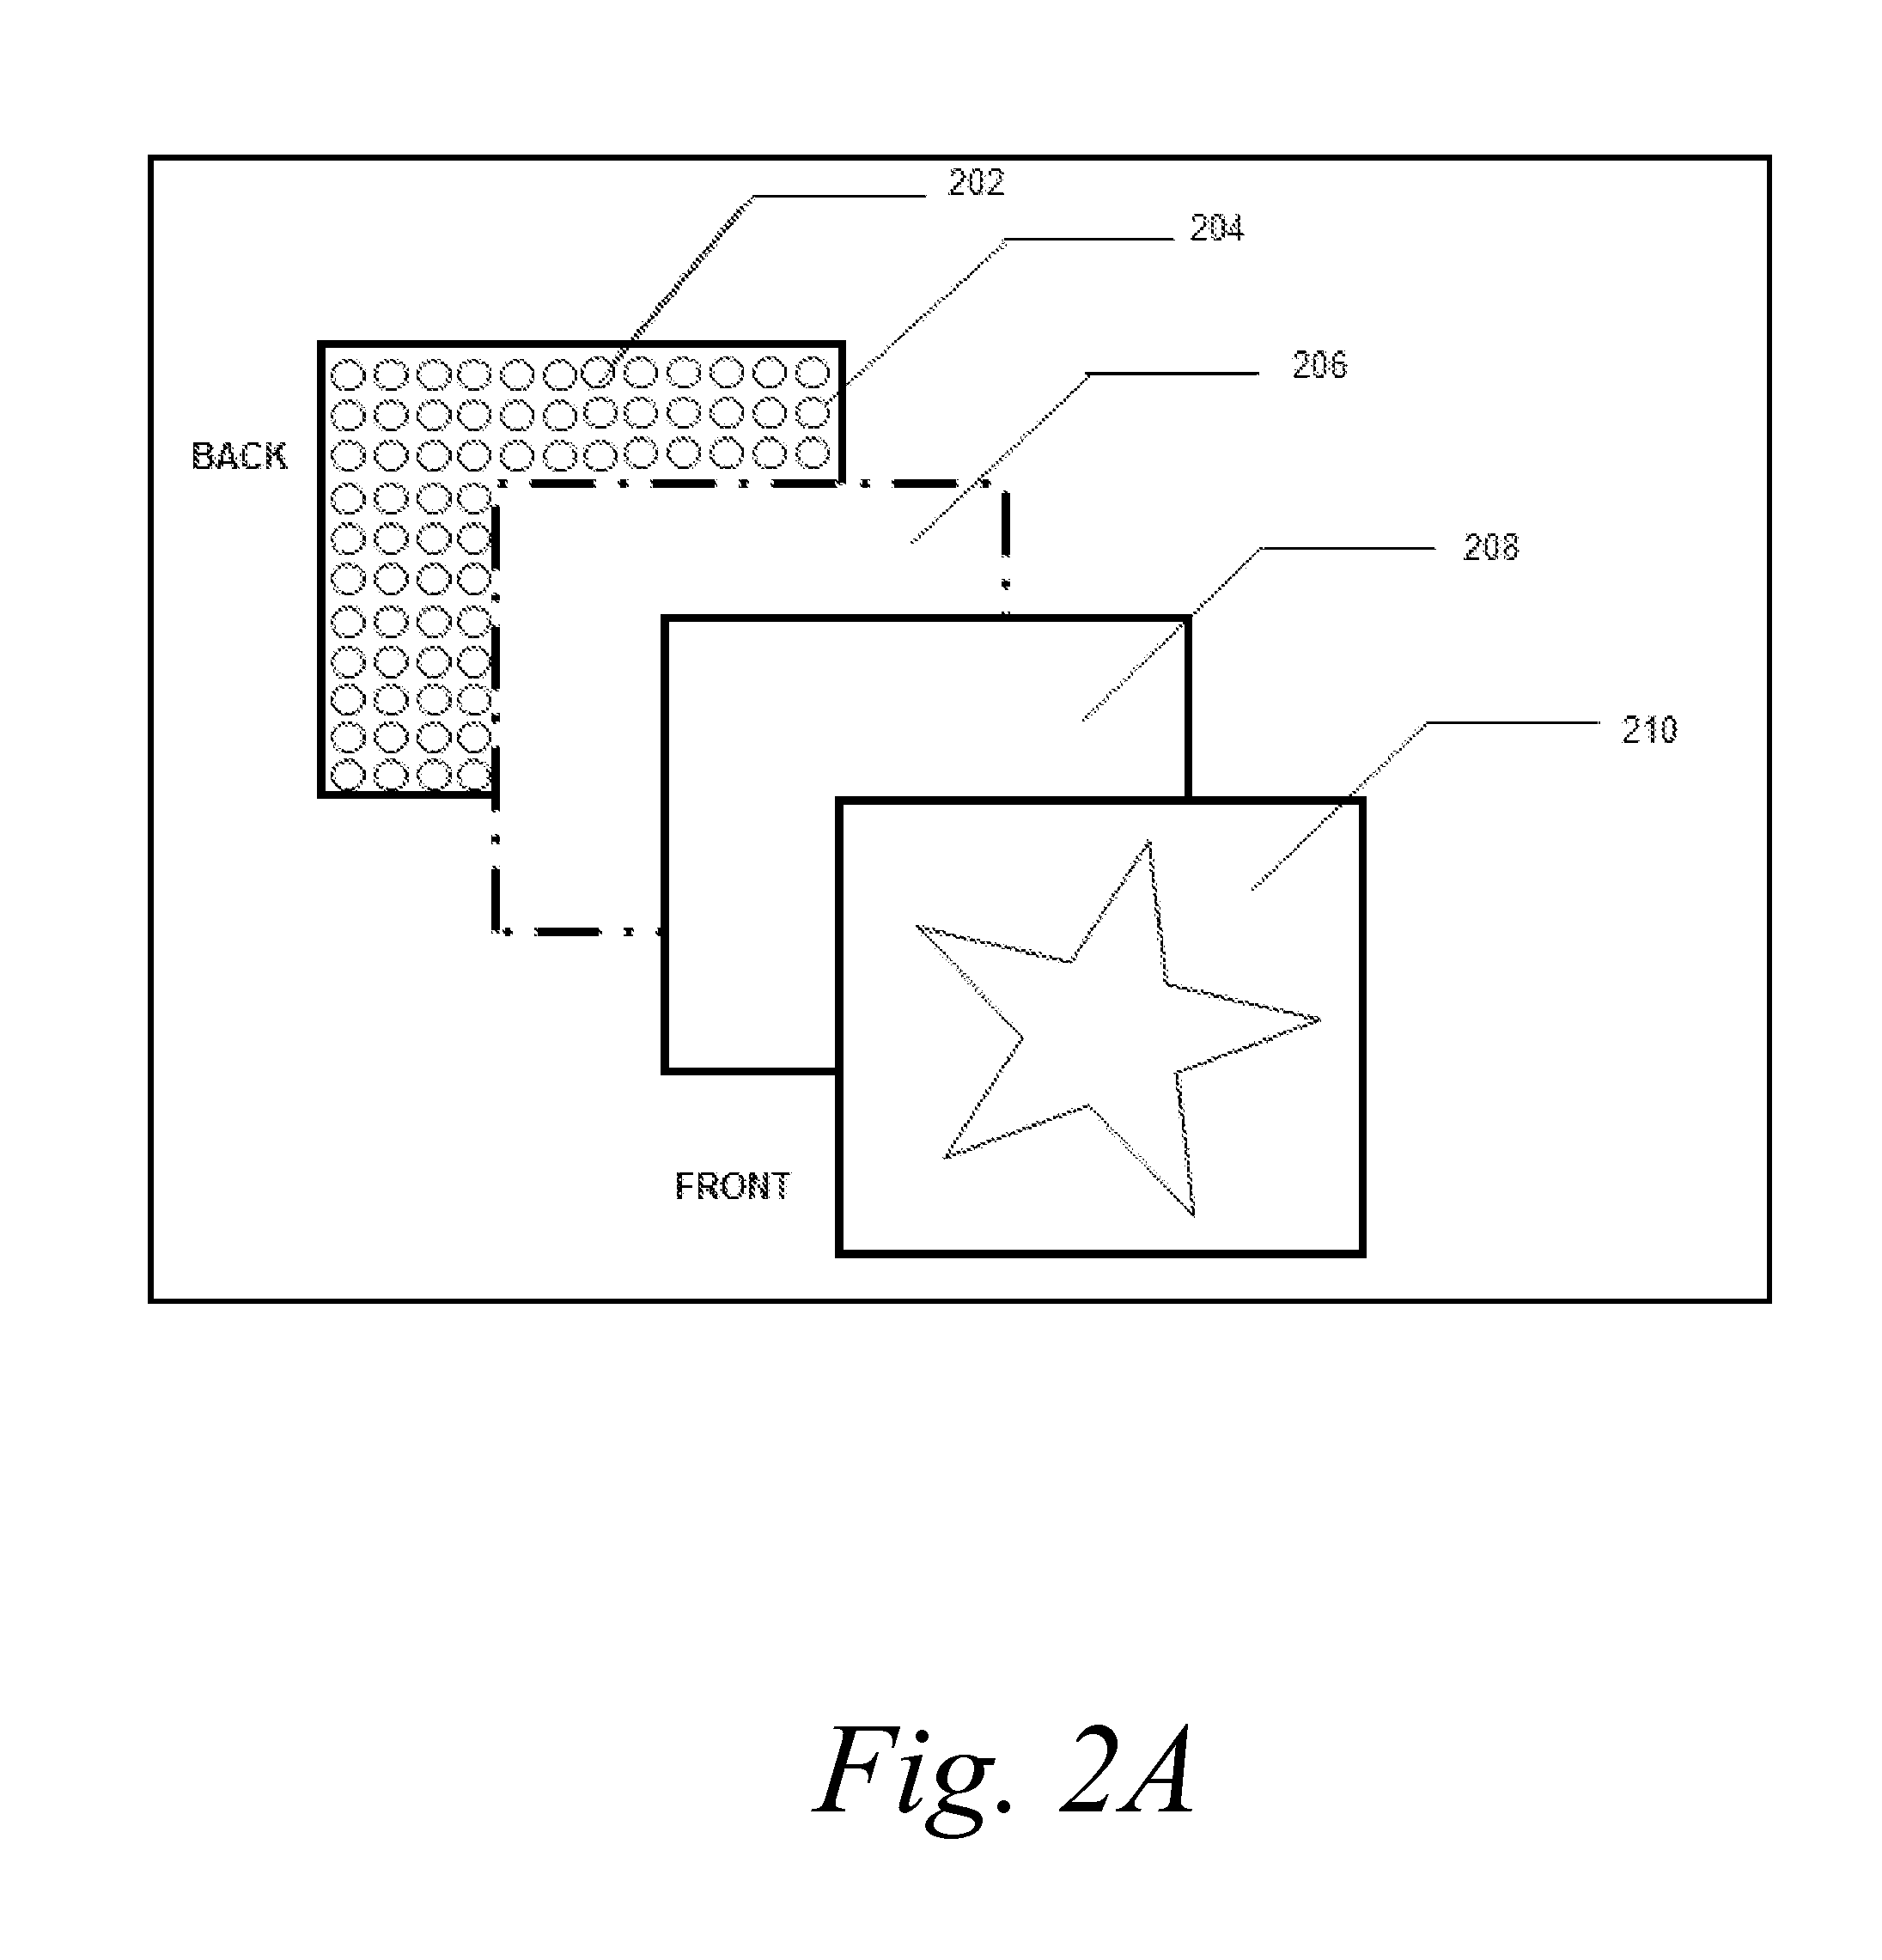 Methods and systems for displaying a message in a wide-spectrum display